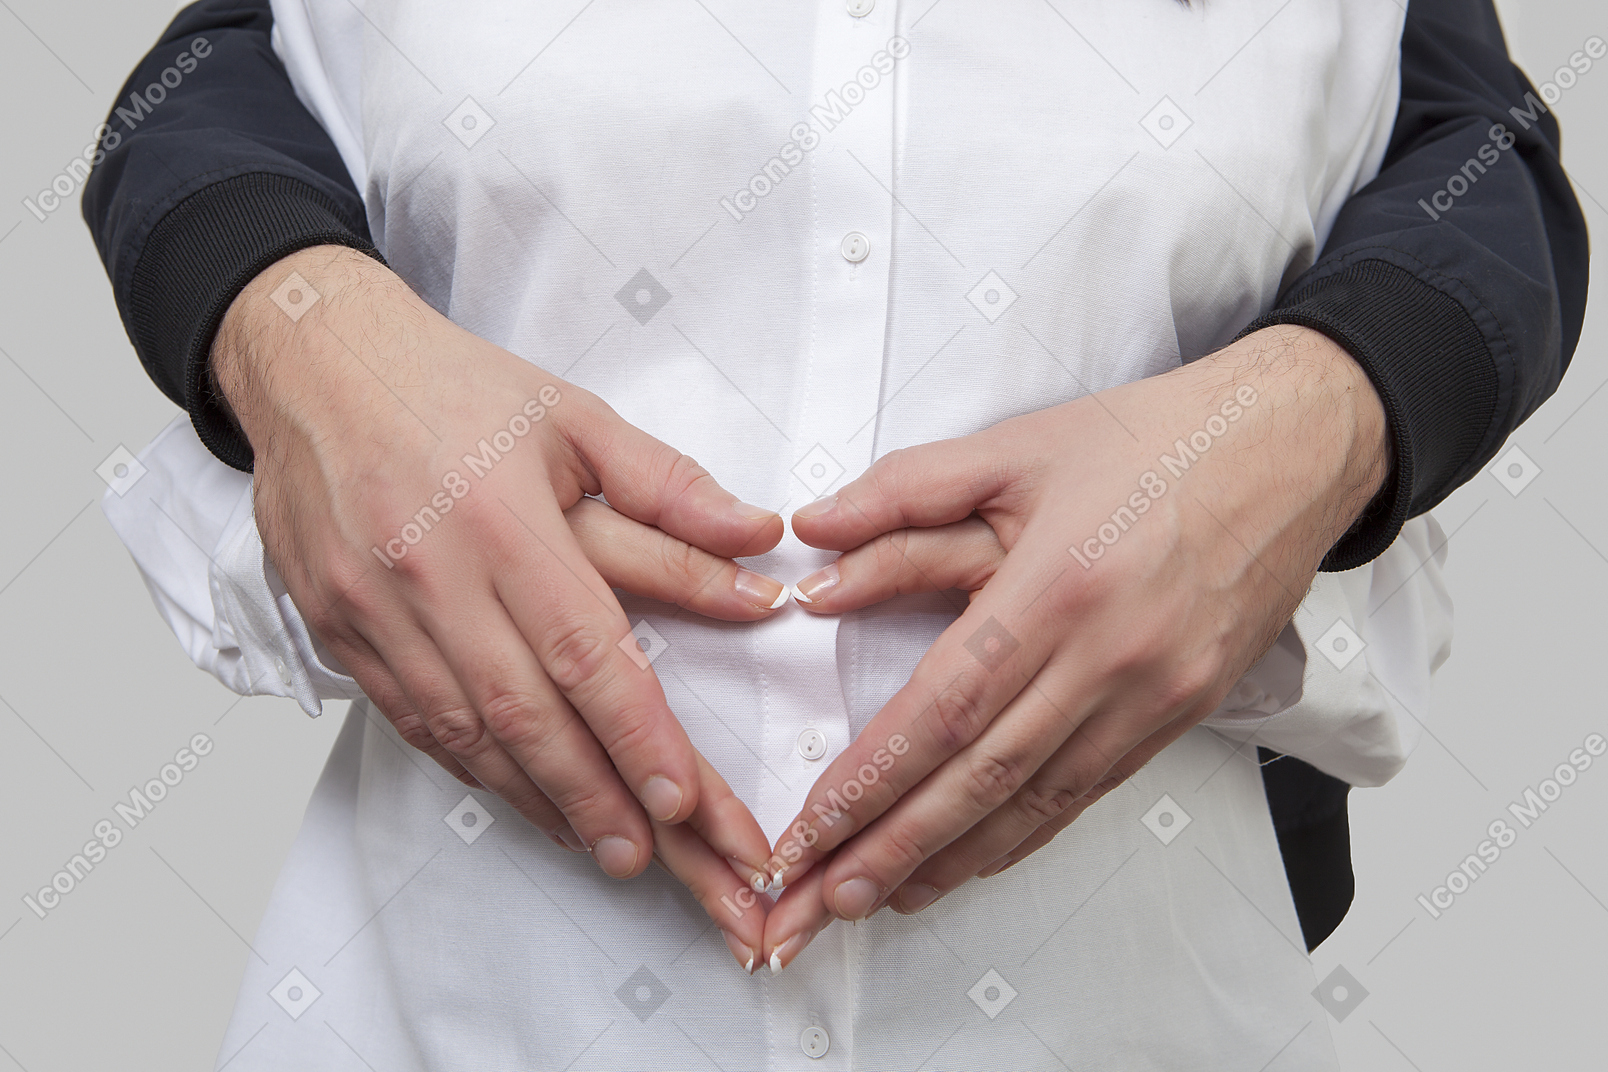 Close up of man's hands holding woman's hand from behind and forming heart